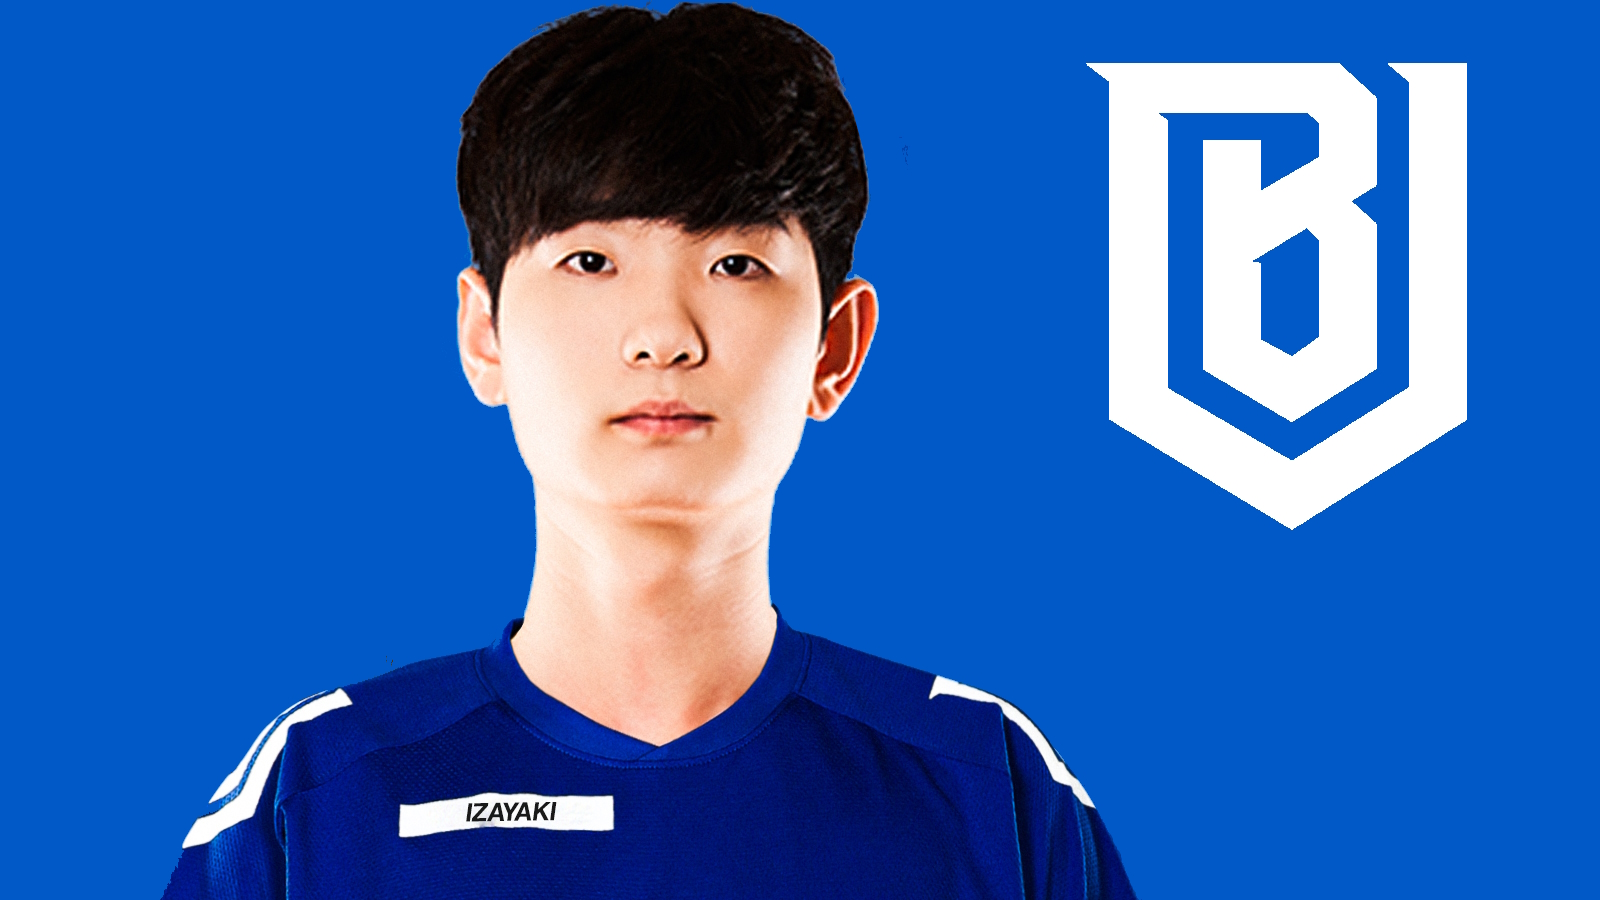 Overwatch League pro IZaYaKI suffers collapsed lung and is receiving treatment – Egaxo